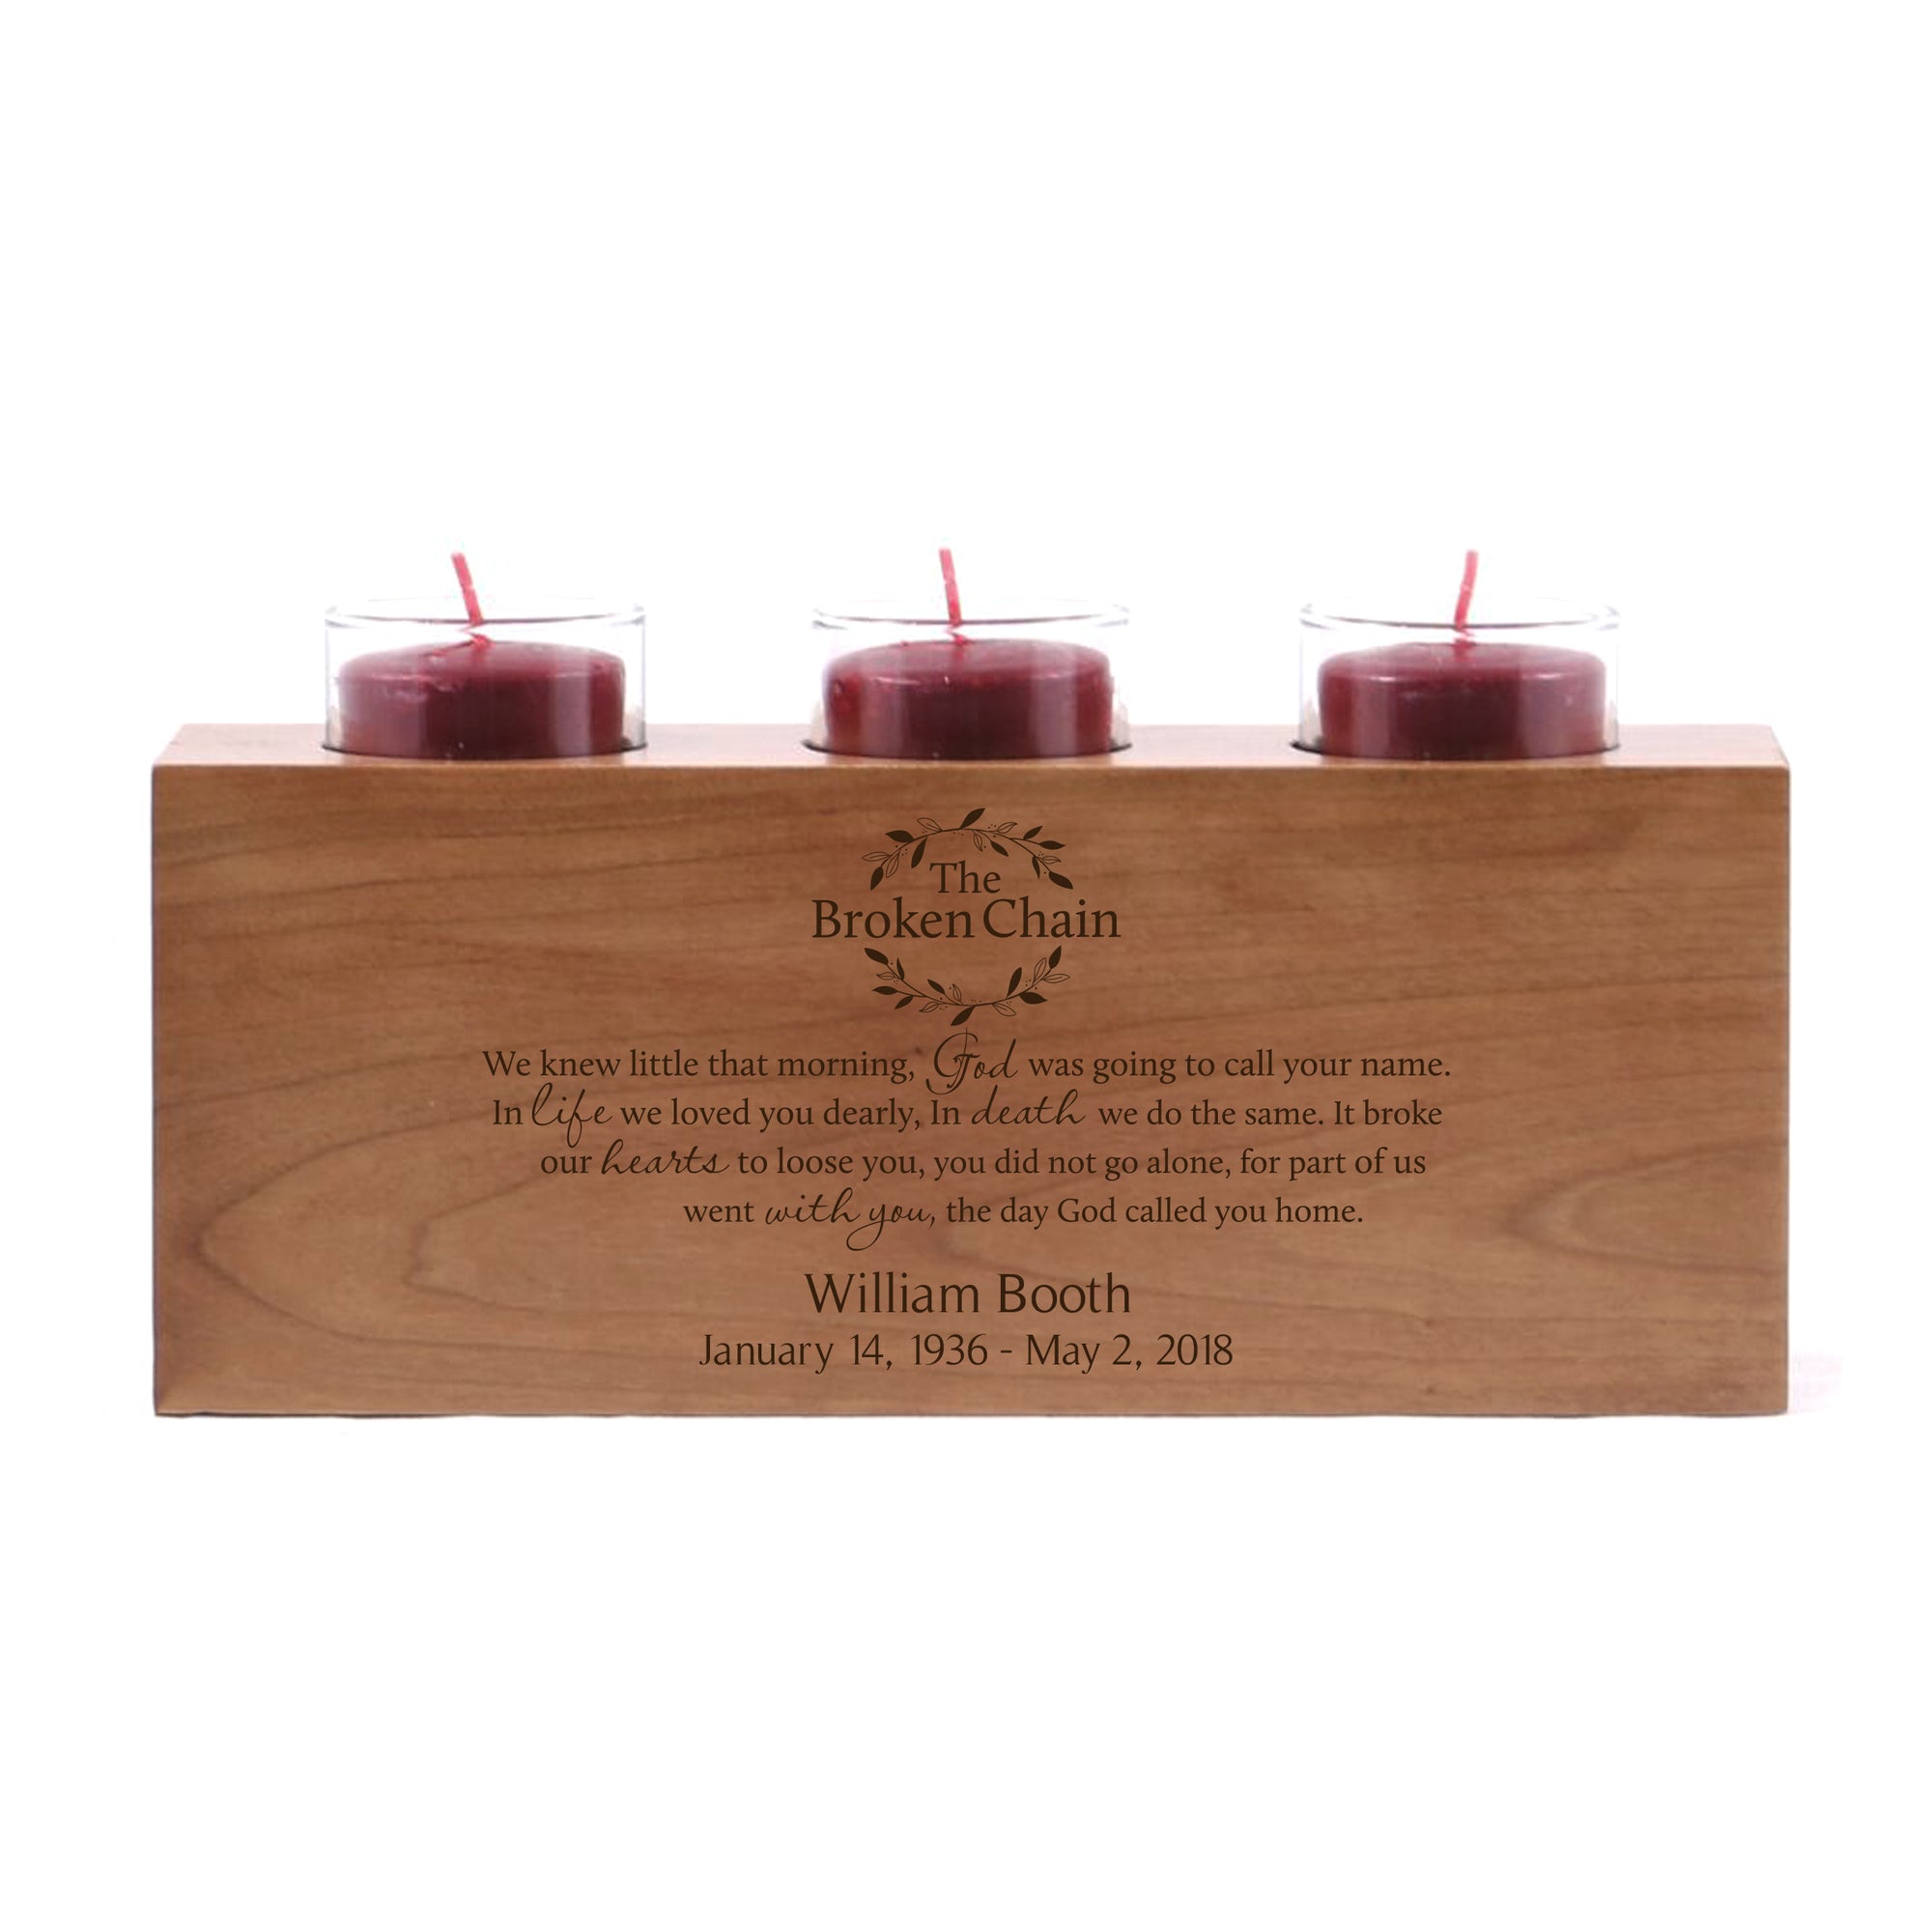 LifeSong Milestones Personalized Memorial 3 Votive Candle Holder The Broken Chain Bereavement Keepsake Candle Holder Loss of Loved One Sympathy Home Decor - 10” x 4” x 4”